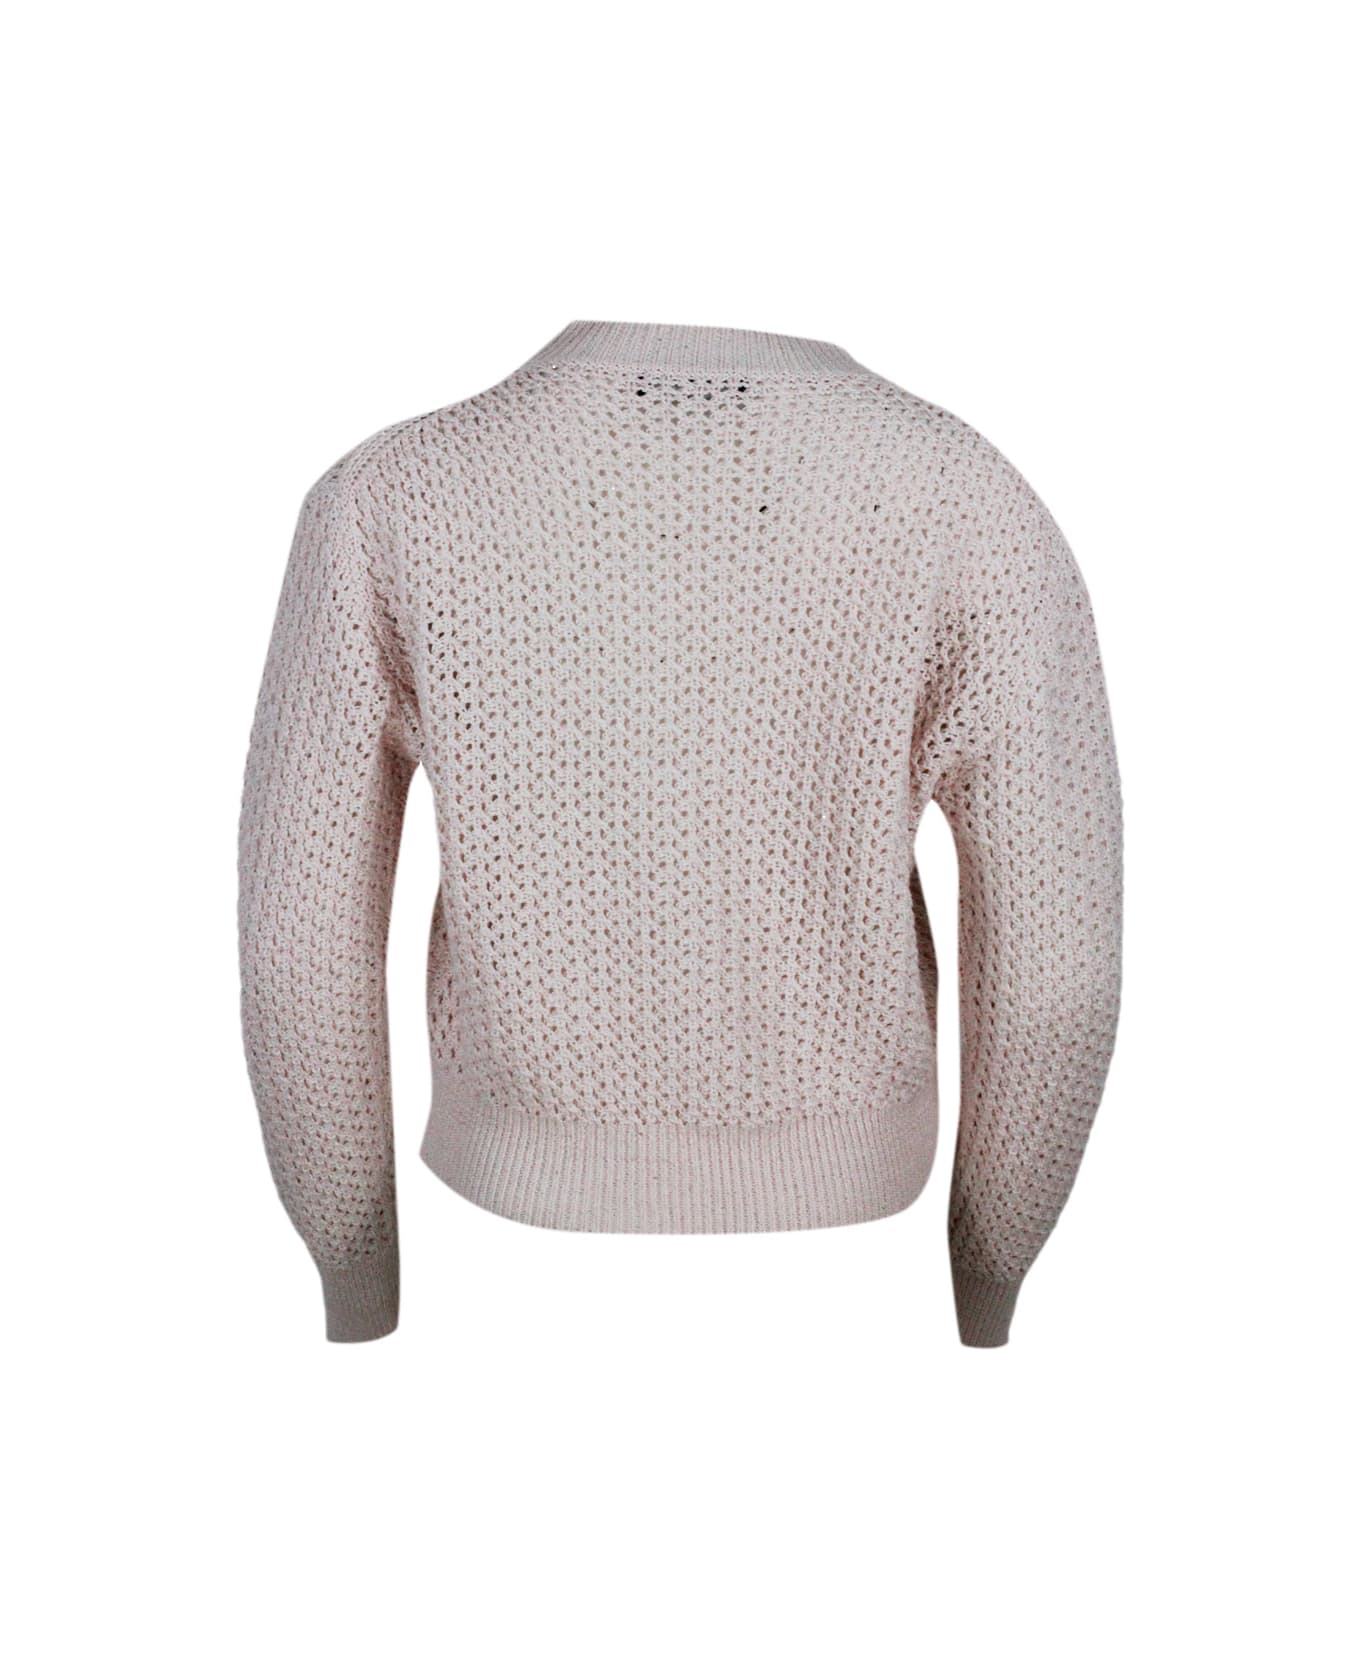 Fabiana Filippi Long-sleeved Crew-neck Sweater In Cotton And Linen With Loose-weave Workmanship With Microsequins - Pink ニットウェア